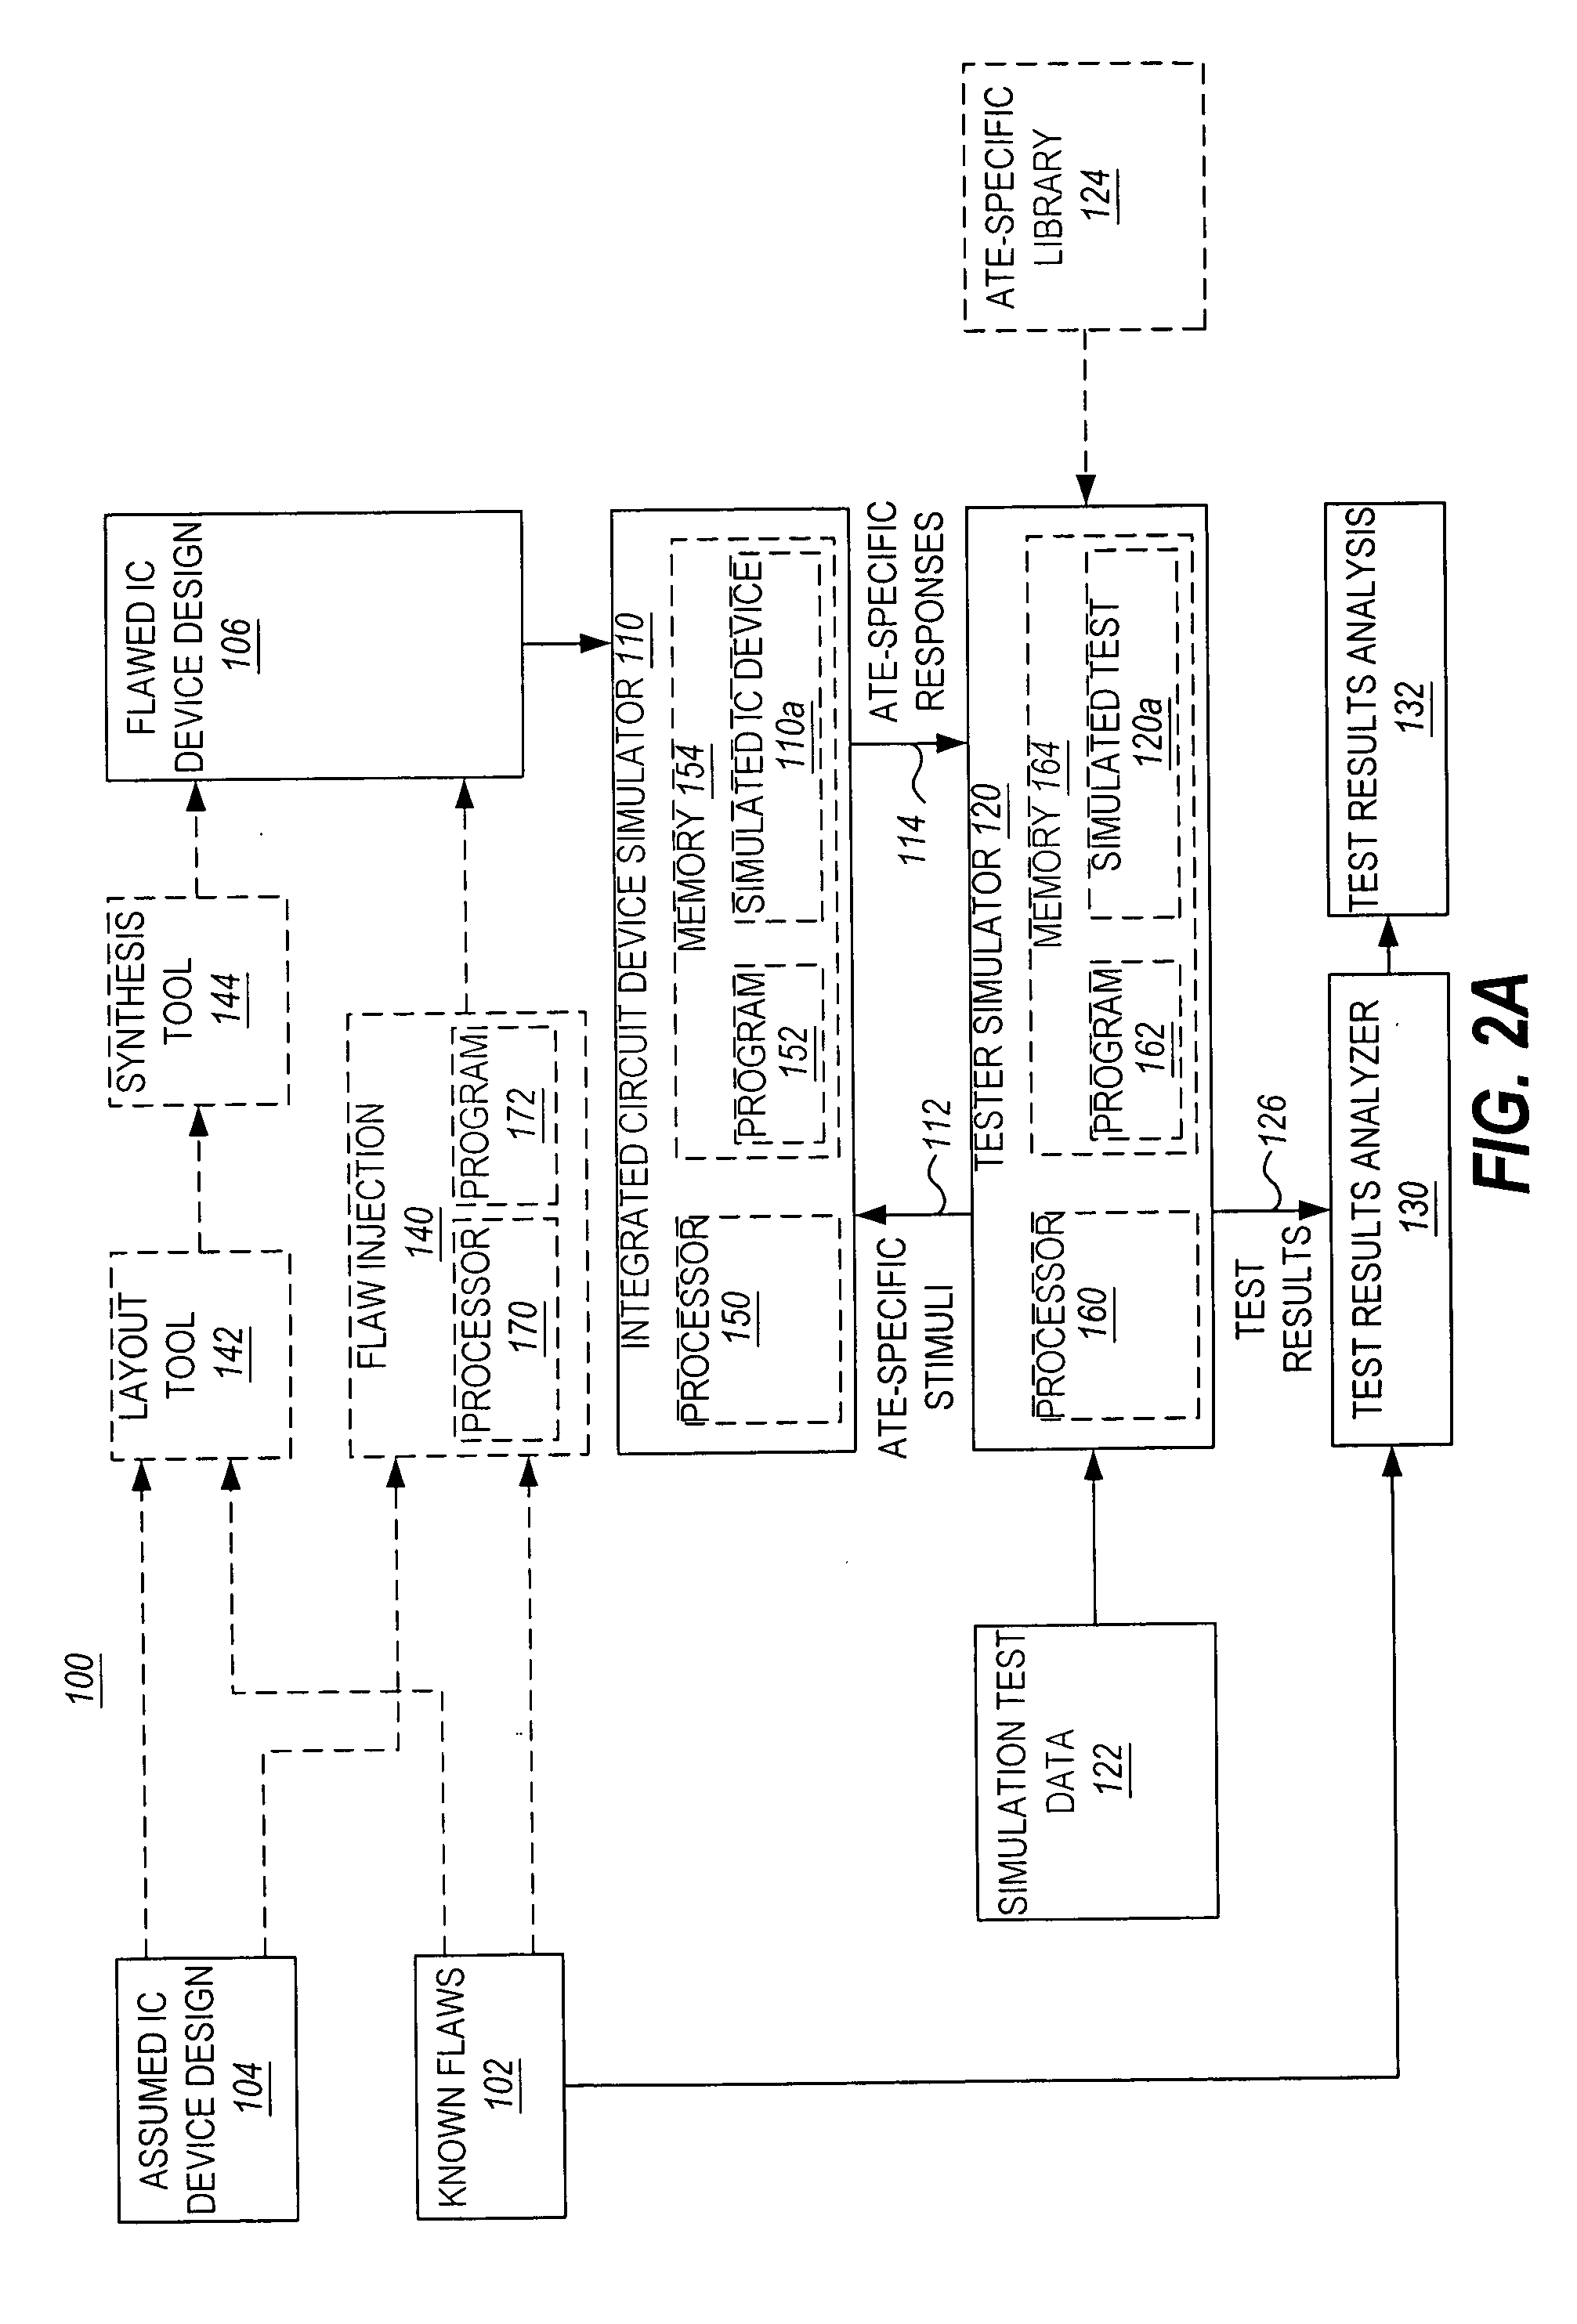 Verification of integrated circuit tests using test simulation and integrated circuit simulation with simulated failure